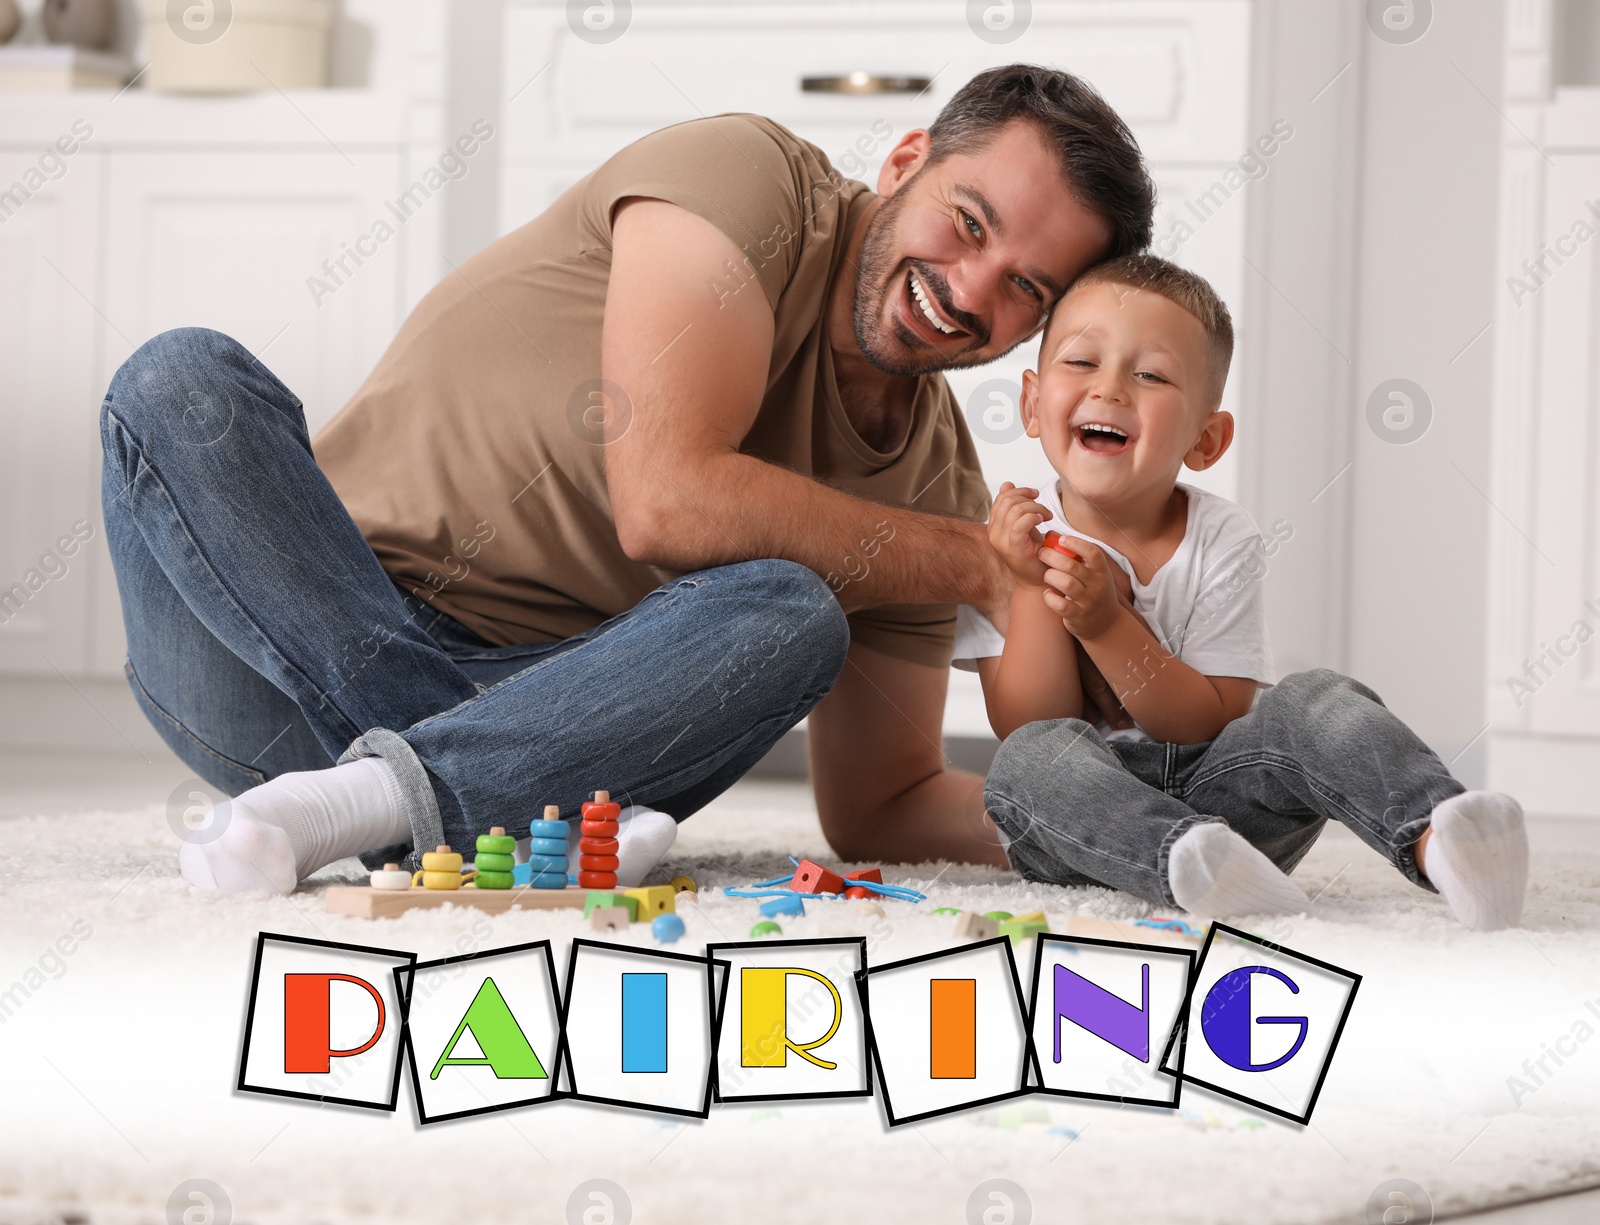 Image of Pairing. Father and his son playing together on floor indoors